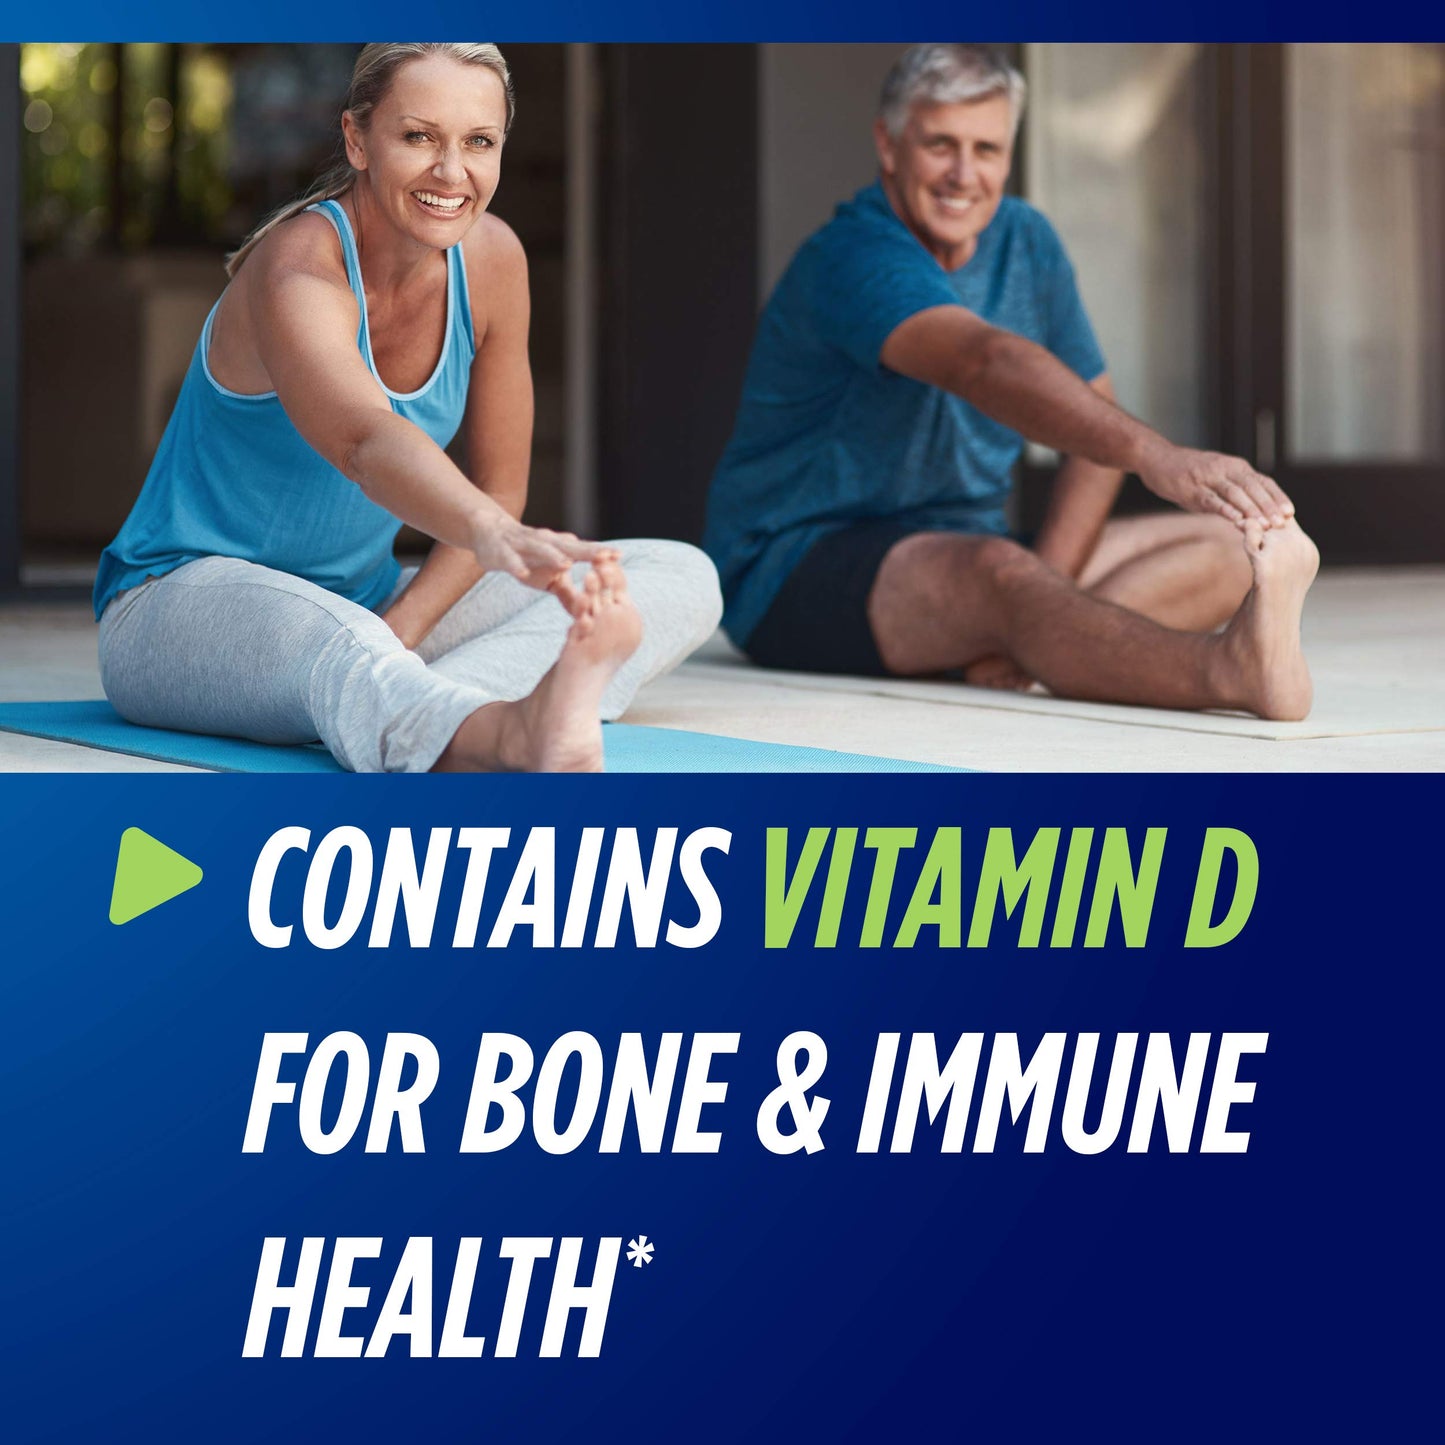 Osteo Bi-Flex One Per Day, 30 Coated Tablets With Vitamin D for Bone and Immune Health*